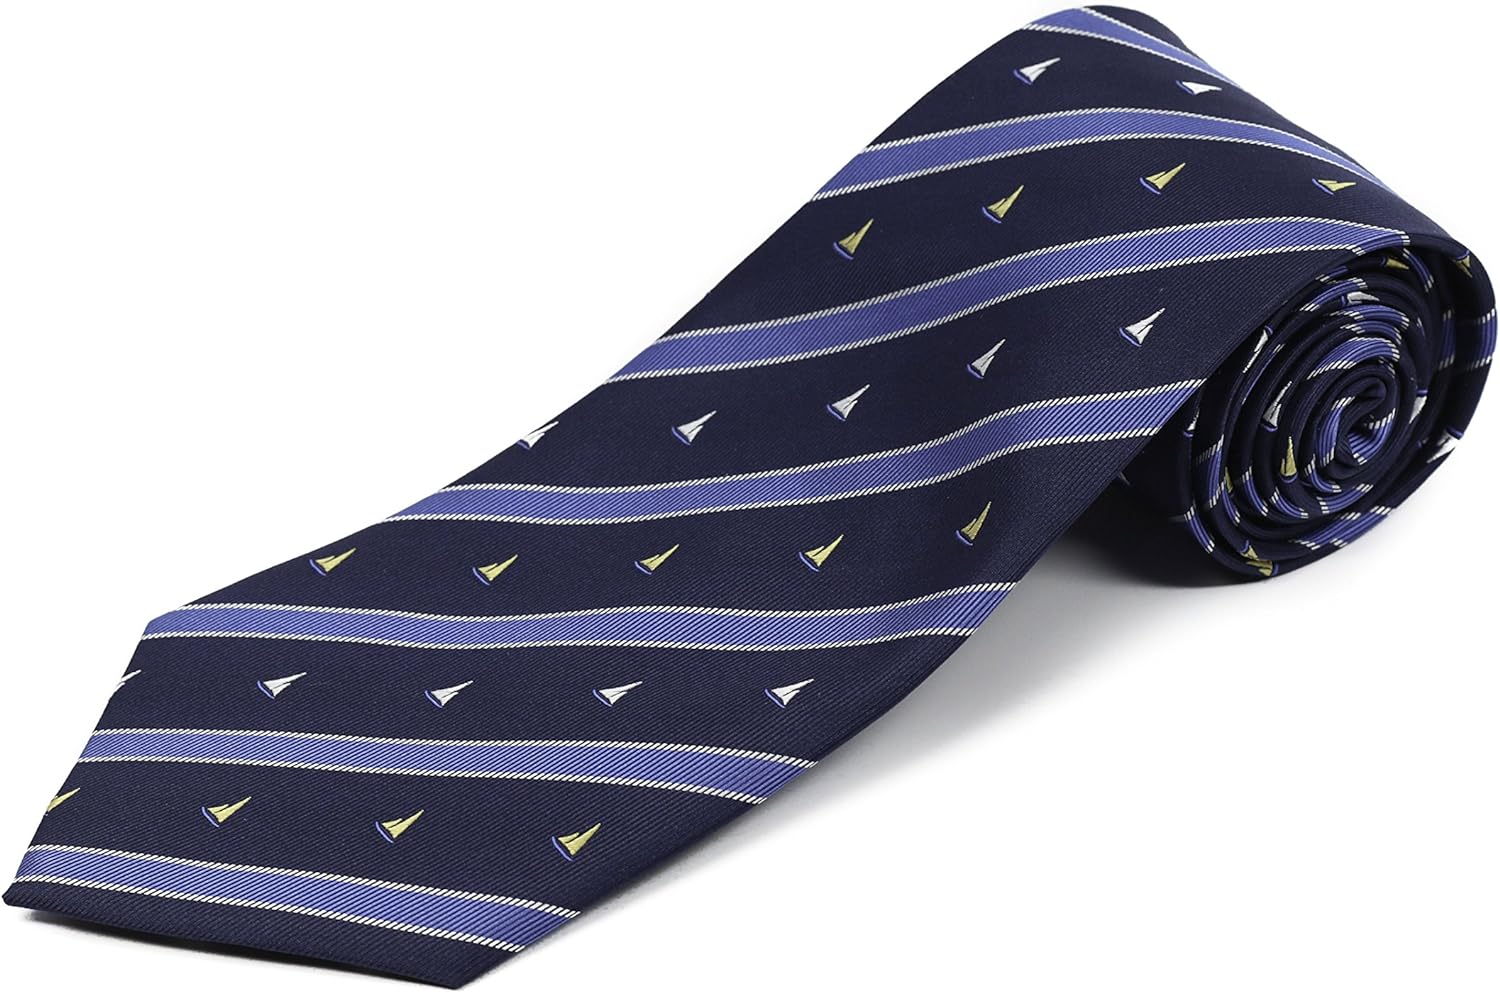 100% Silk Extra Long Necktie for Tall Men | 63 Inches Long 3.75 Inches Wide | Blue Silk with Sailboat Pattern